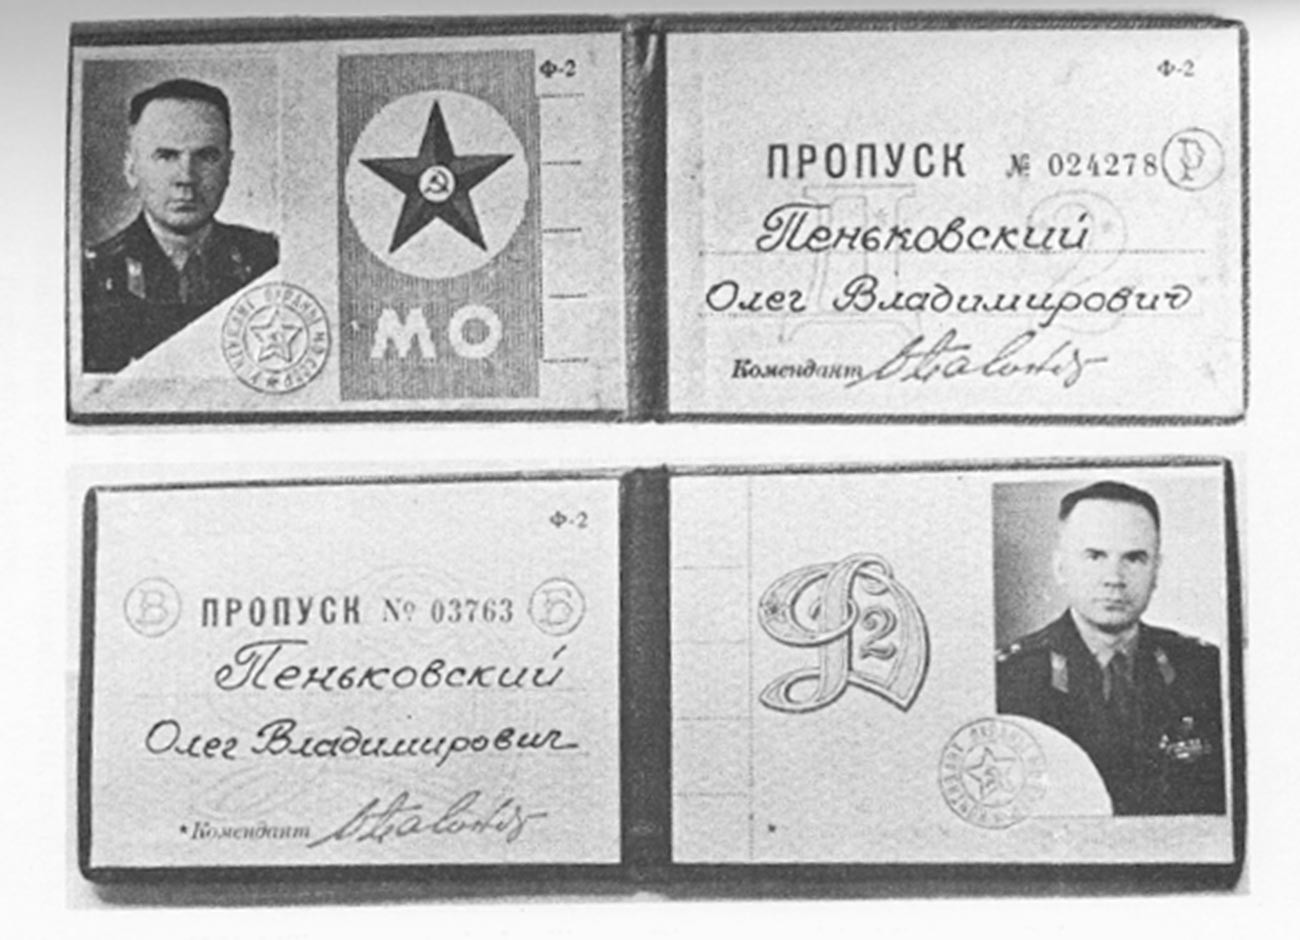 Colonel Oleg Penkovskiy's military pass to the buildings of the General Staff and Ministry of Defense in Moscow.